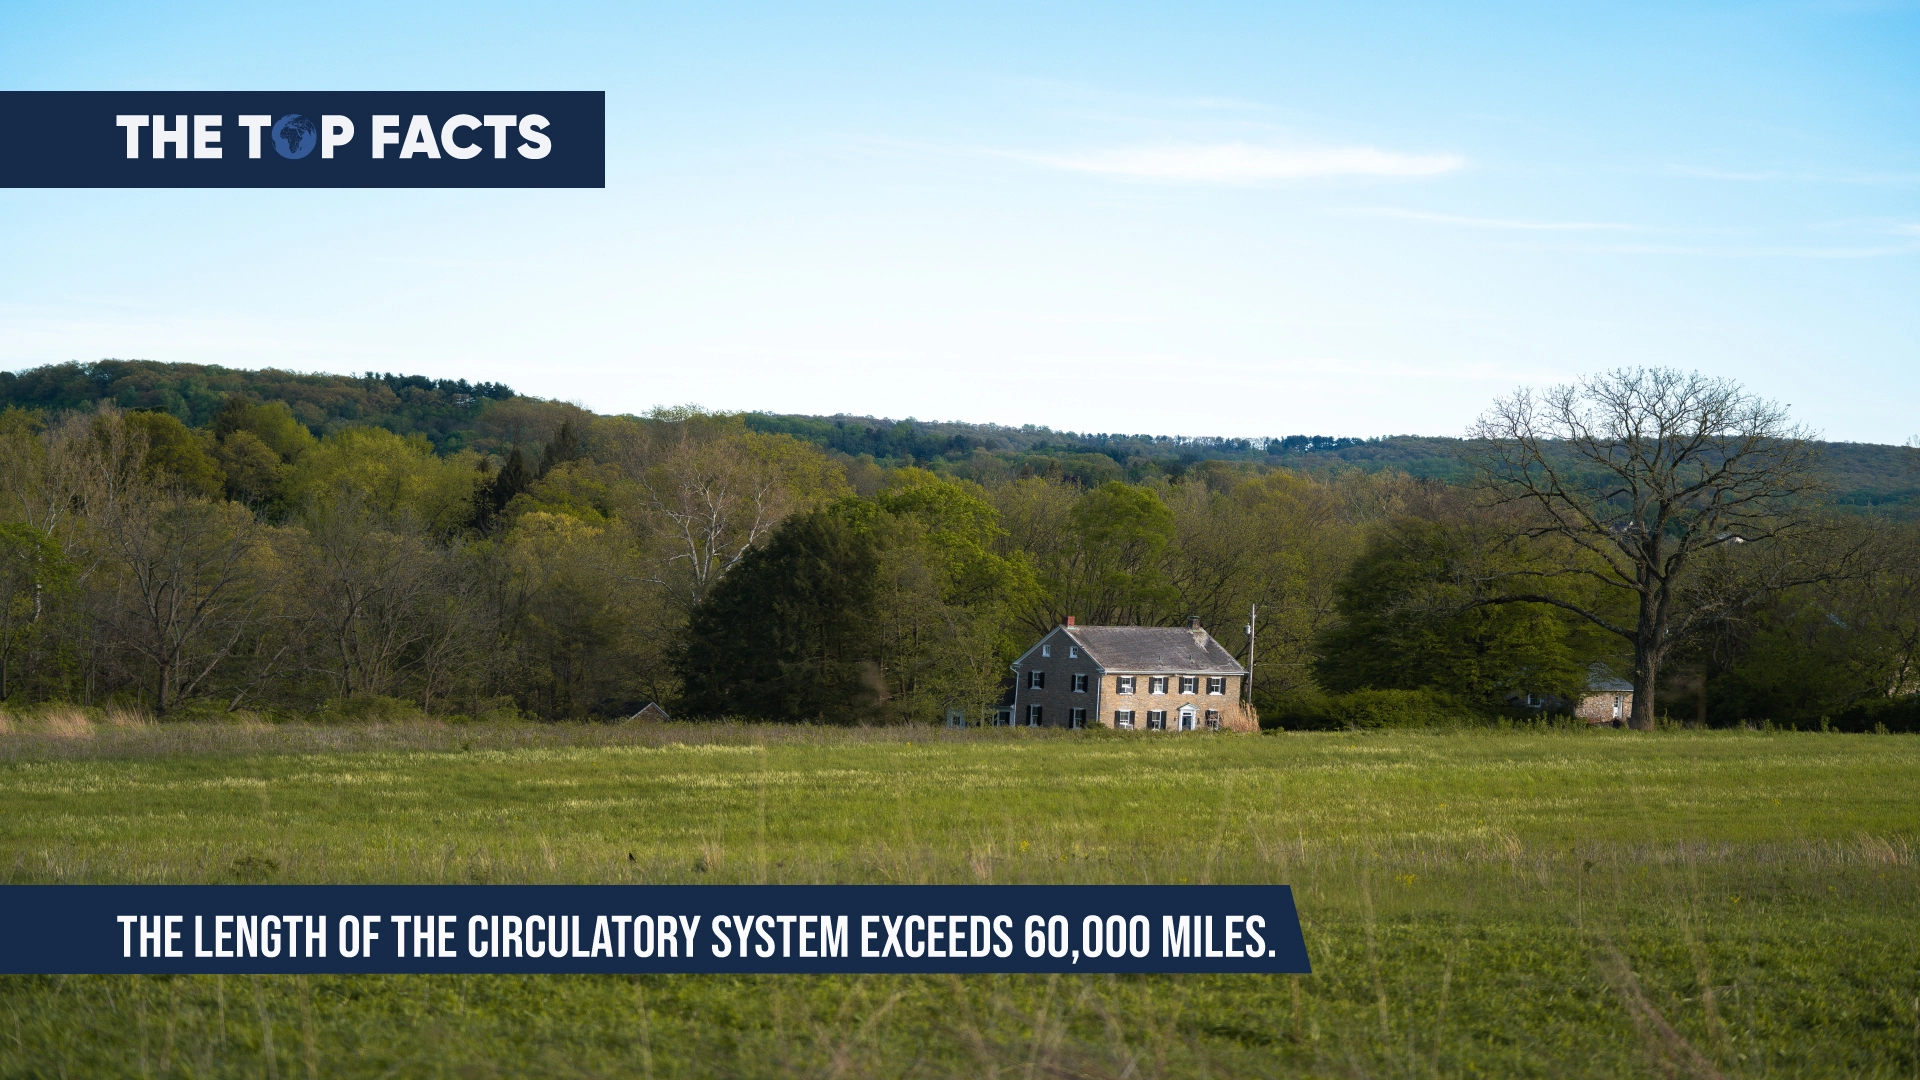 Unknown Facts: The length of the circulatory system exceeds 60,000 miles